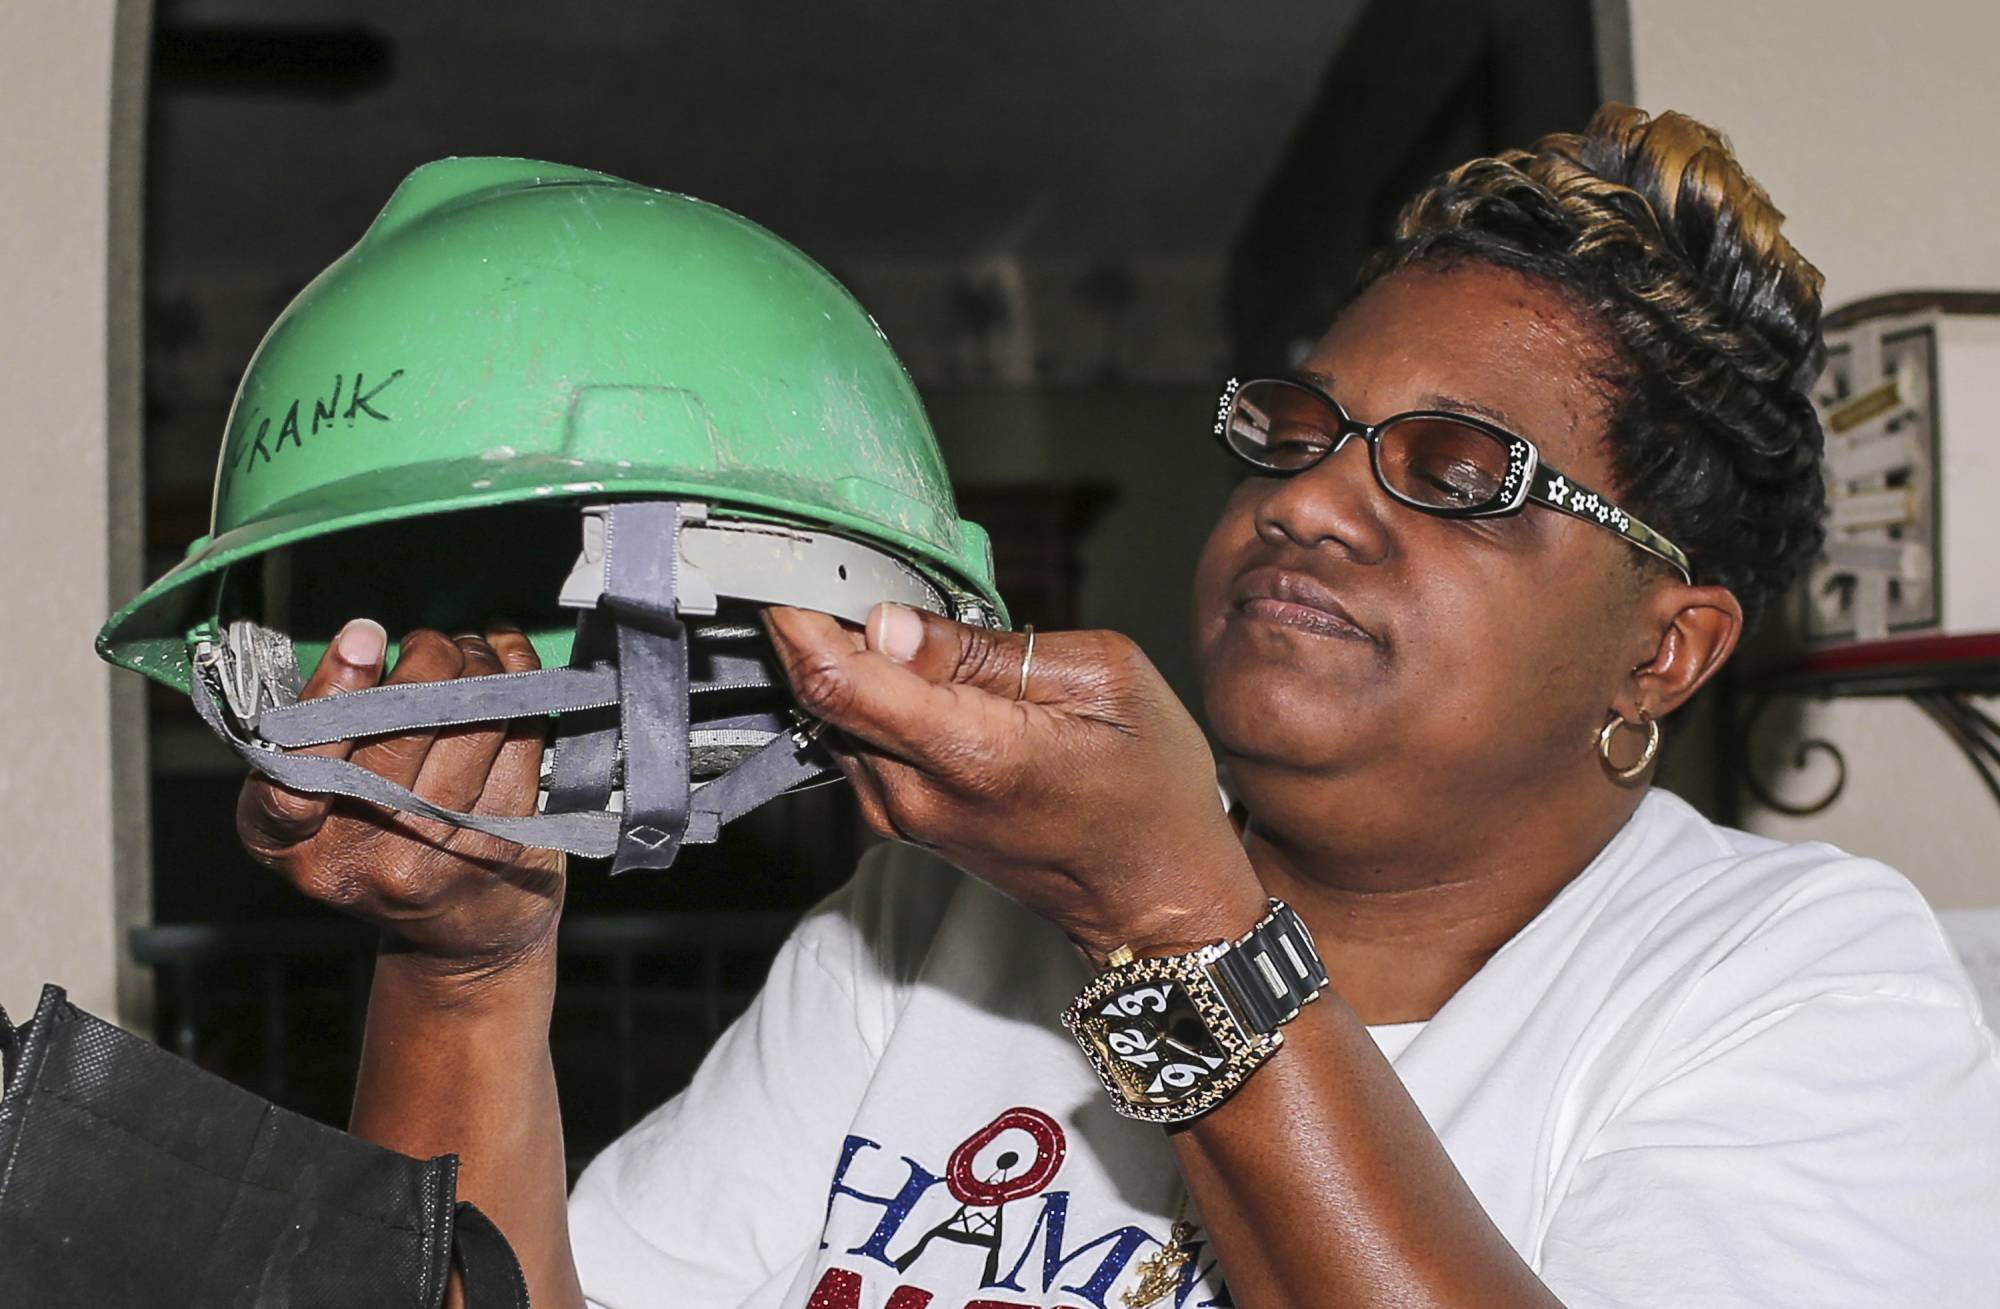 El Faro widow turns anguish into mission for safer ships